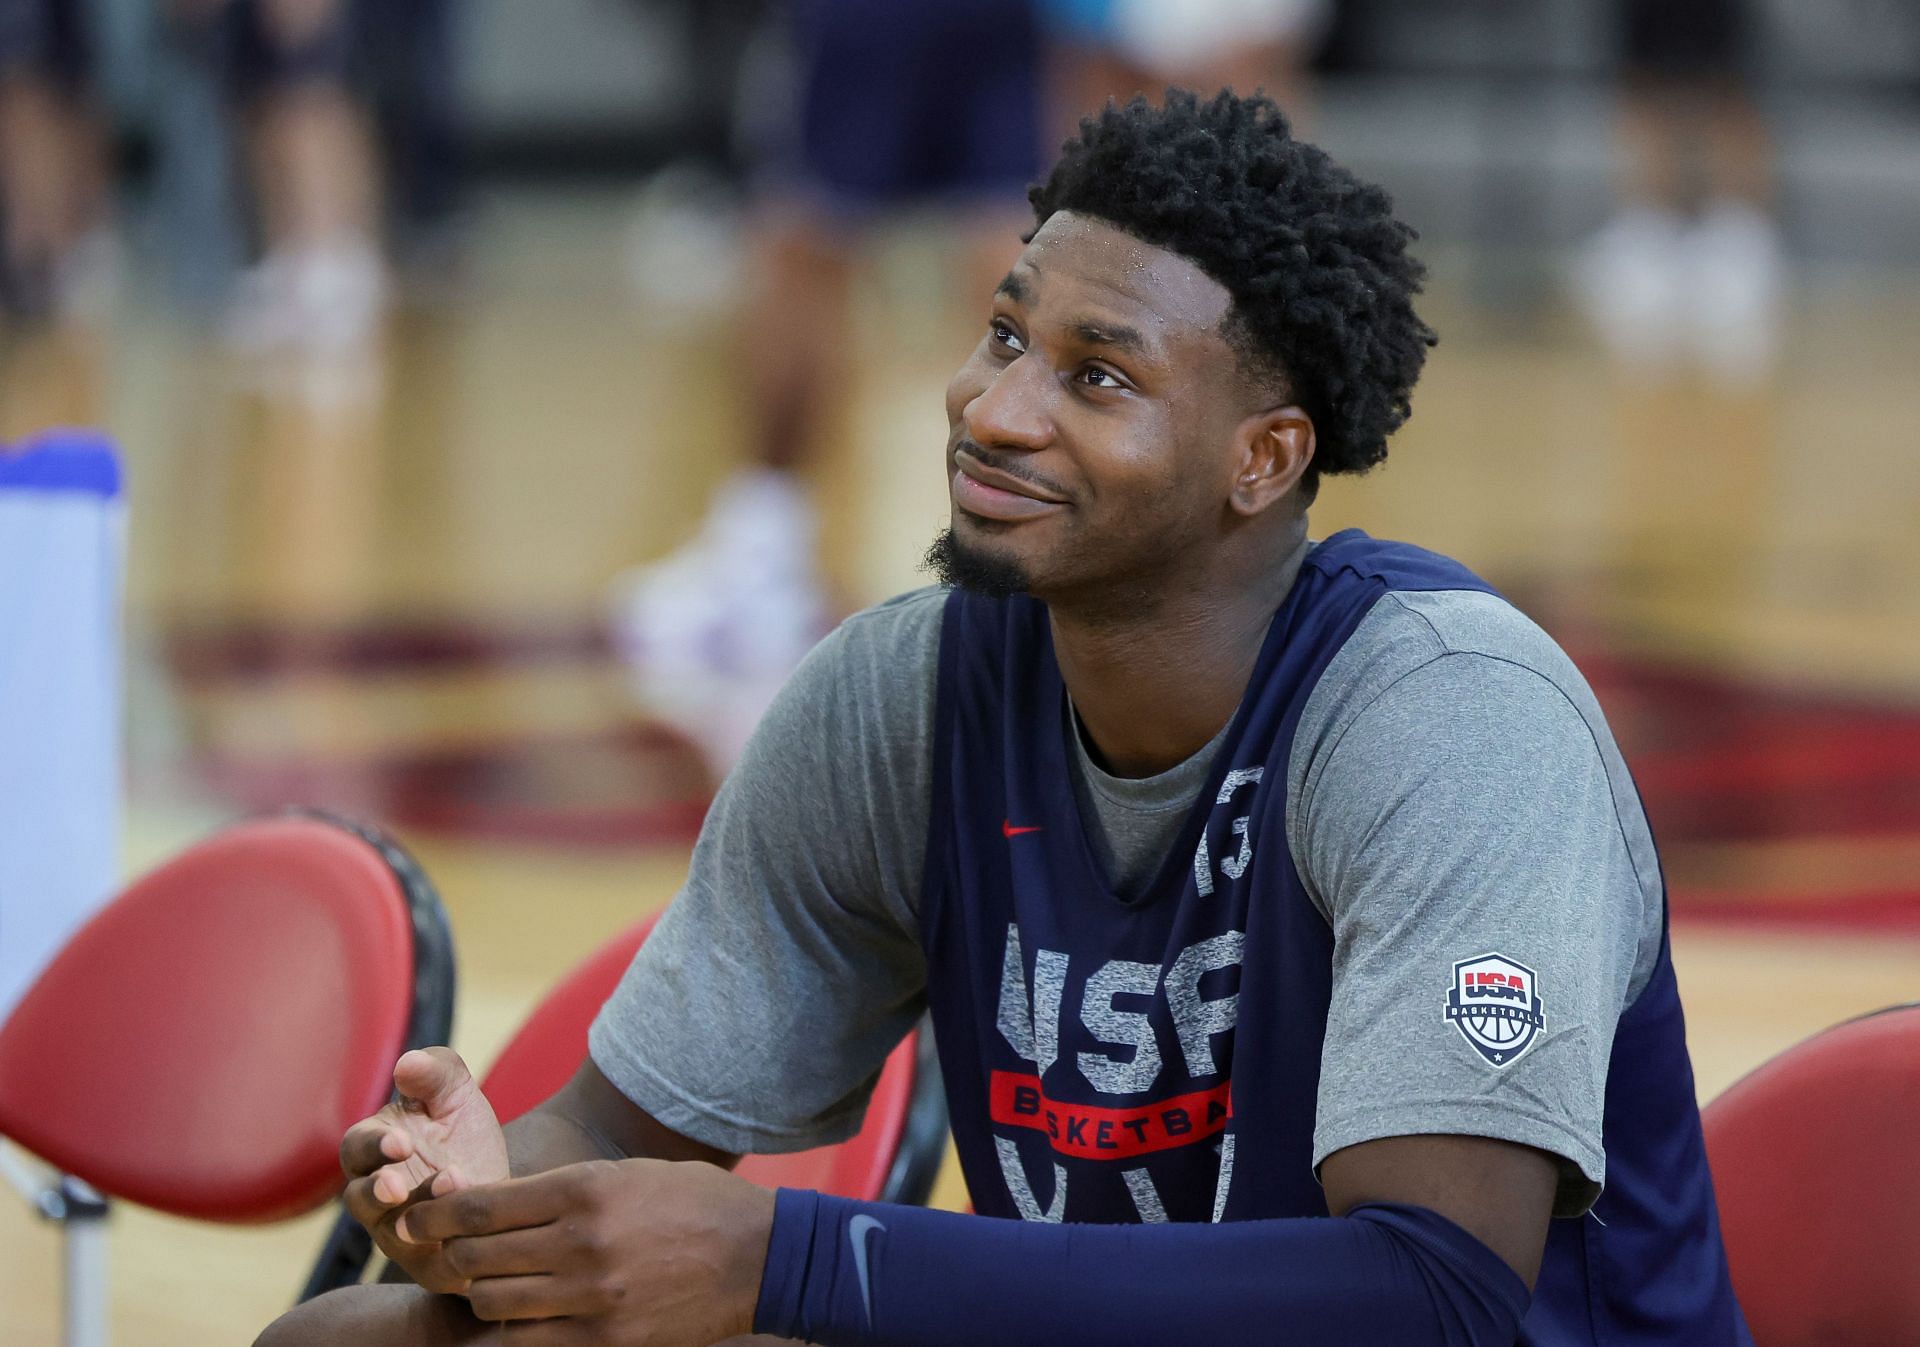 Germany vs USA Basketball Preview Prediction, rosters, and more for